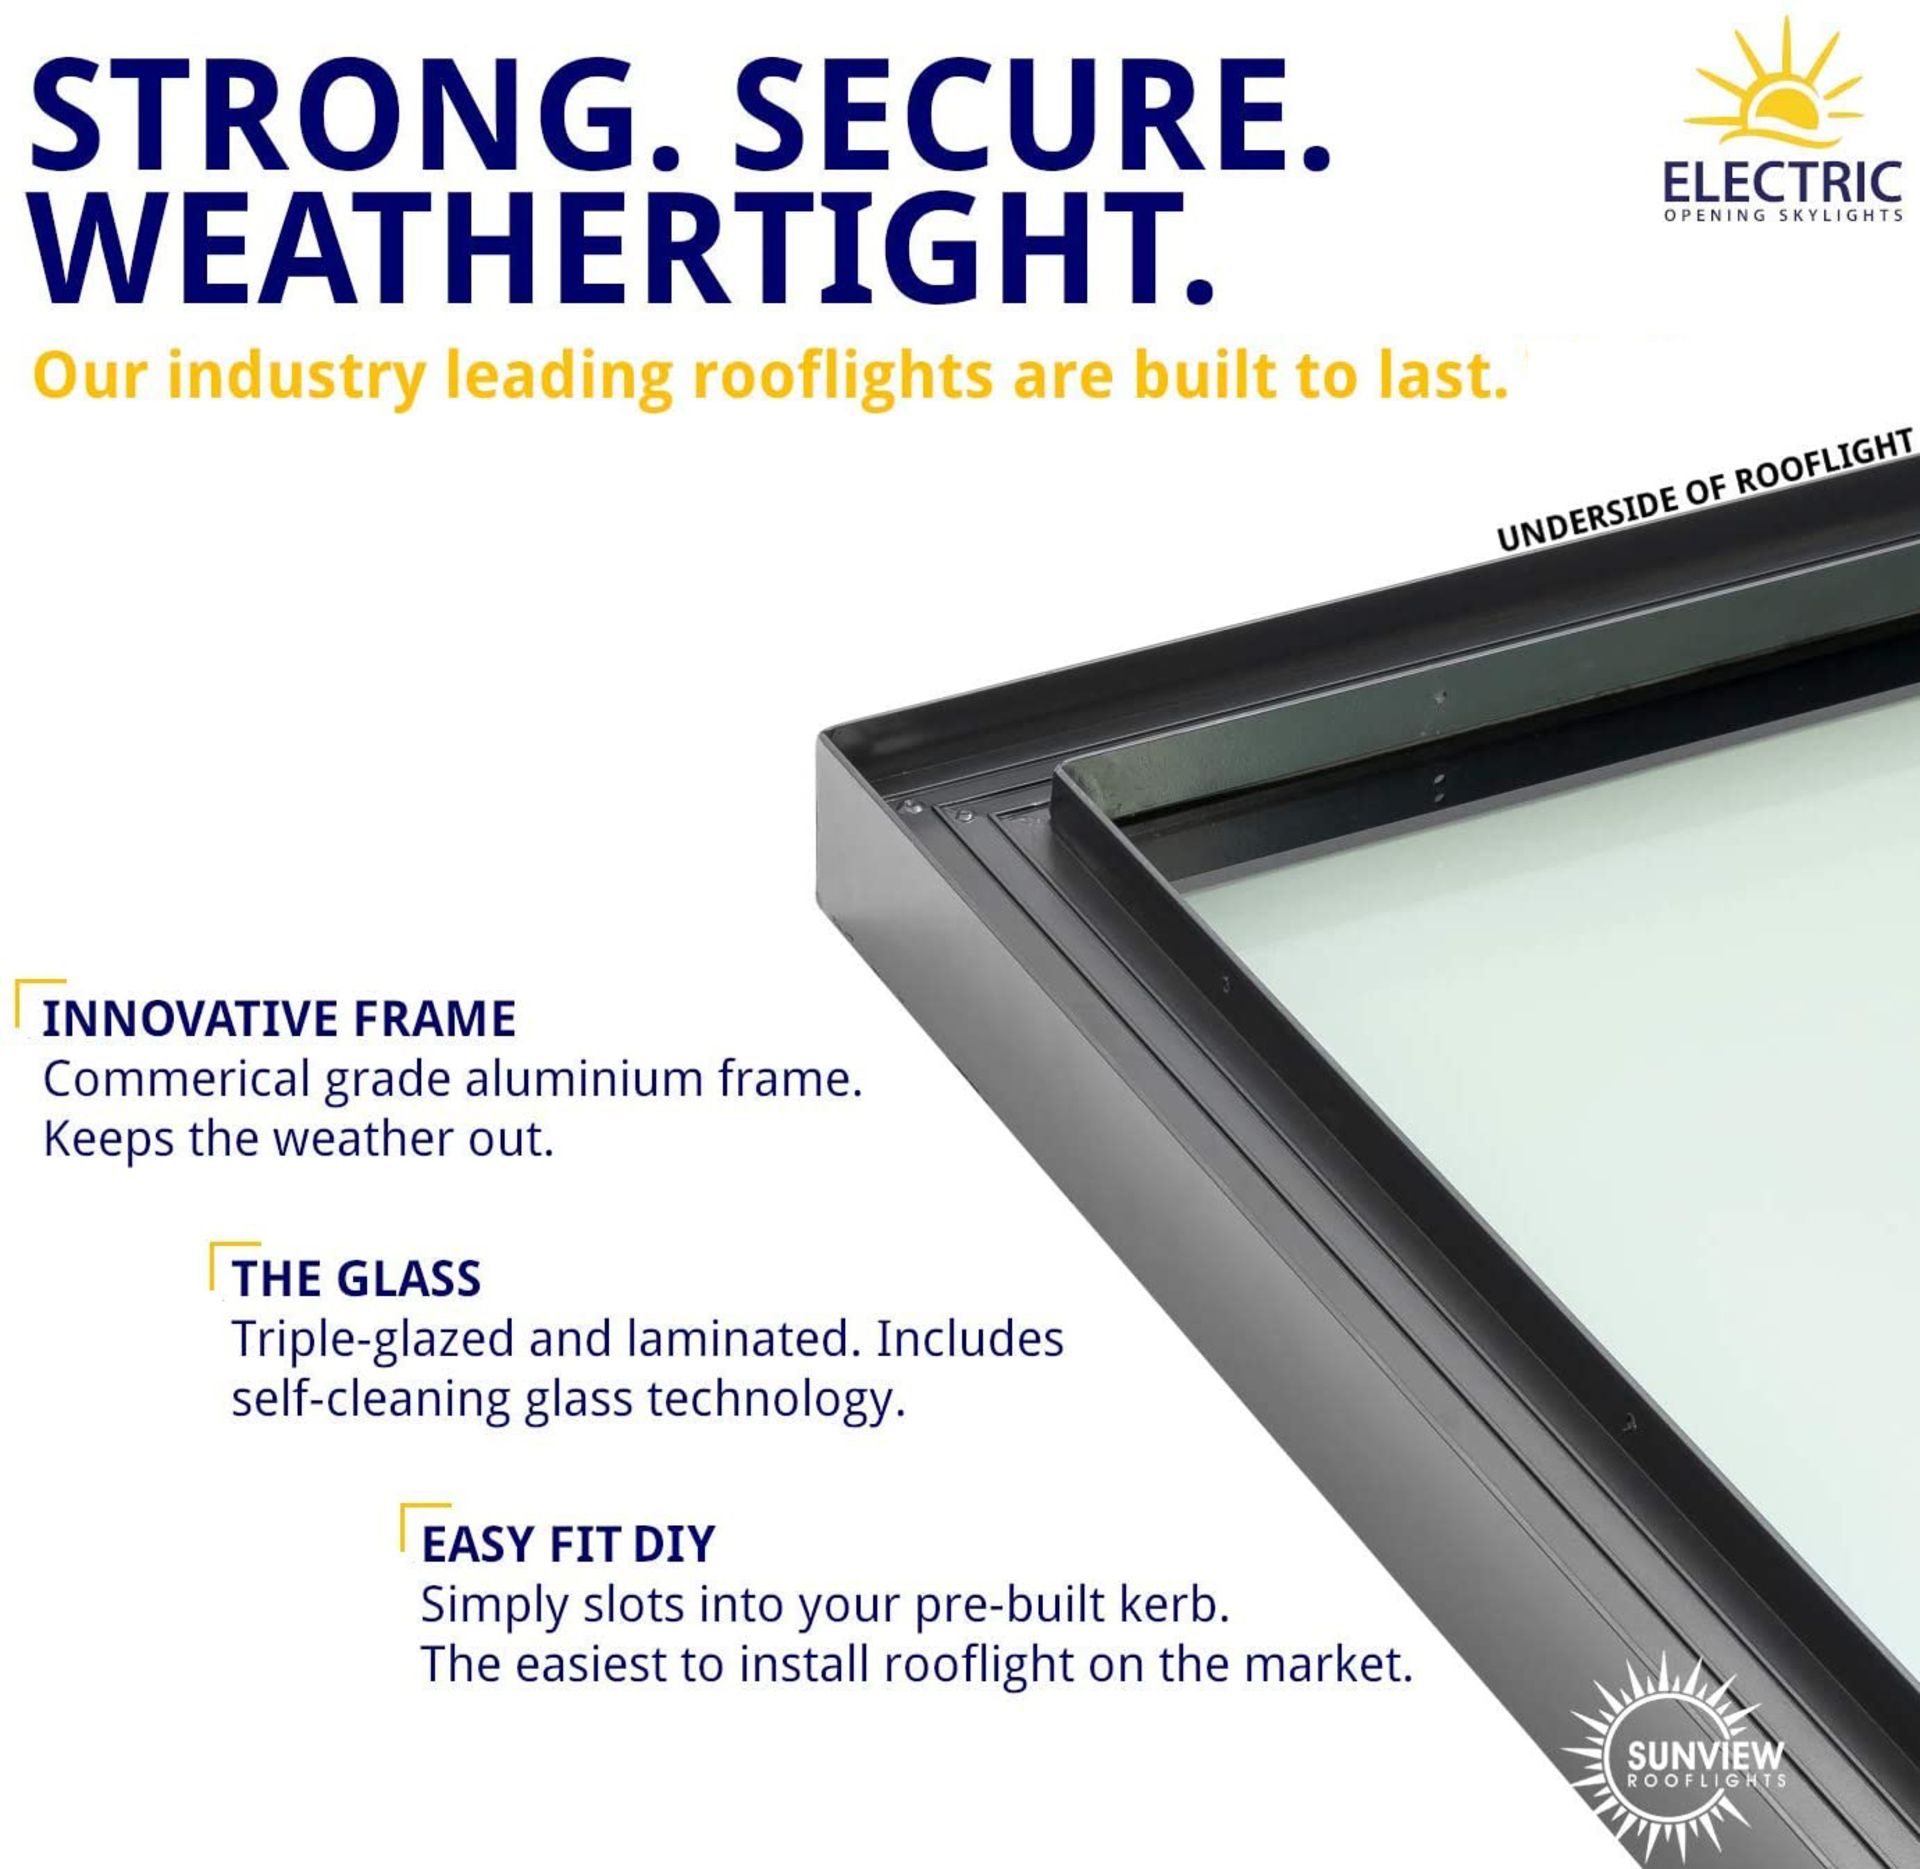 Panoroof (EOS) Fixed Aluminium Triple-Glazed Laminated Skylight with Self-Cleaning Glass - 1500x1500 - Image 2 of 6